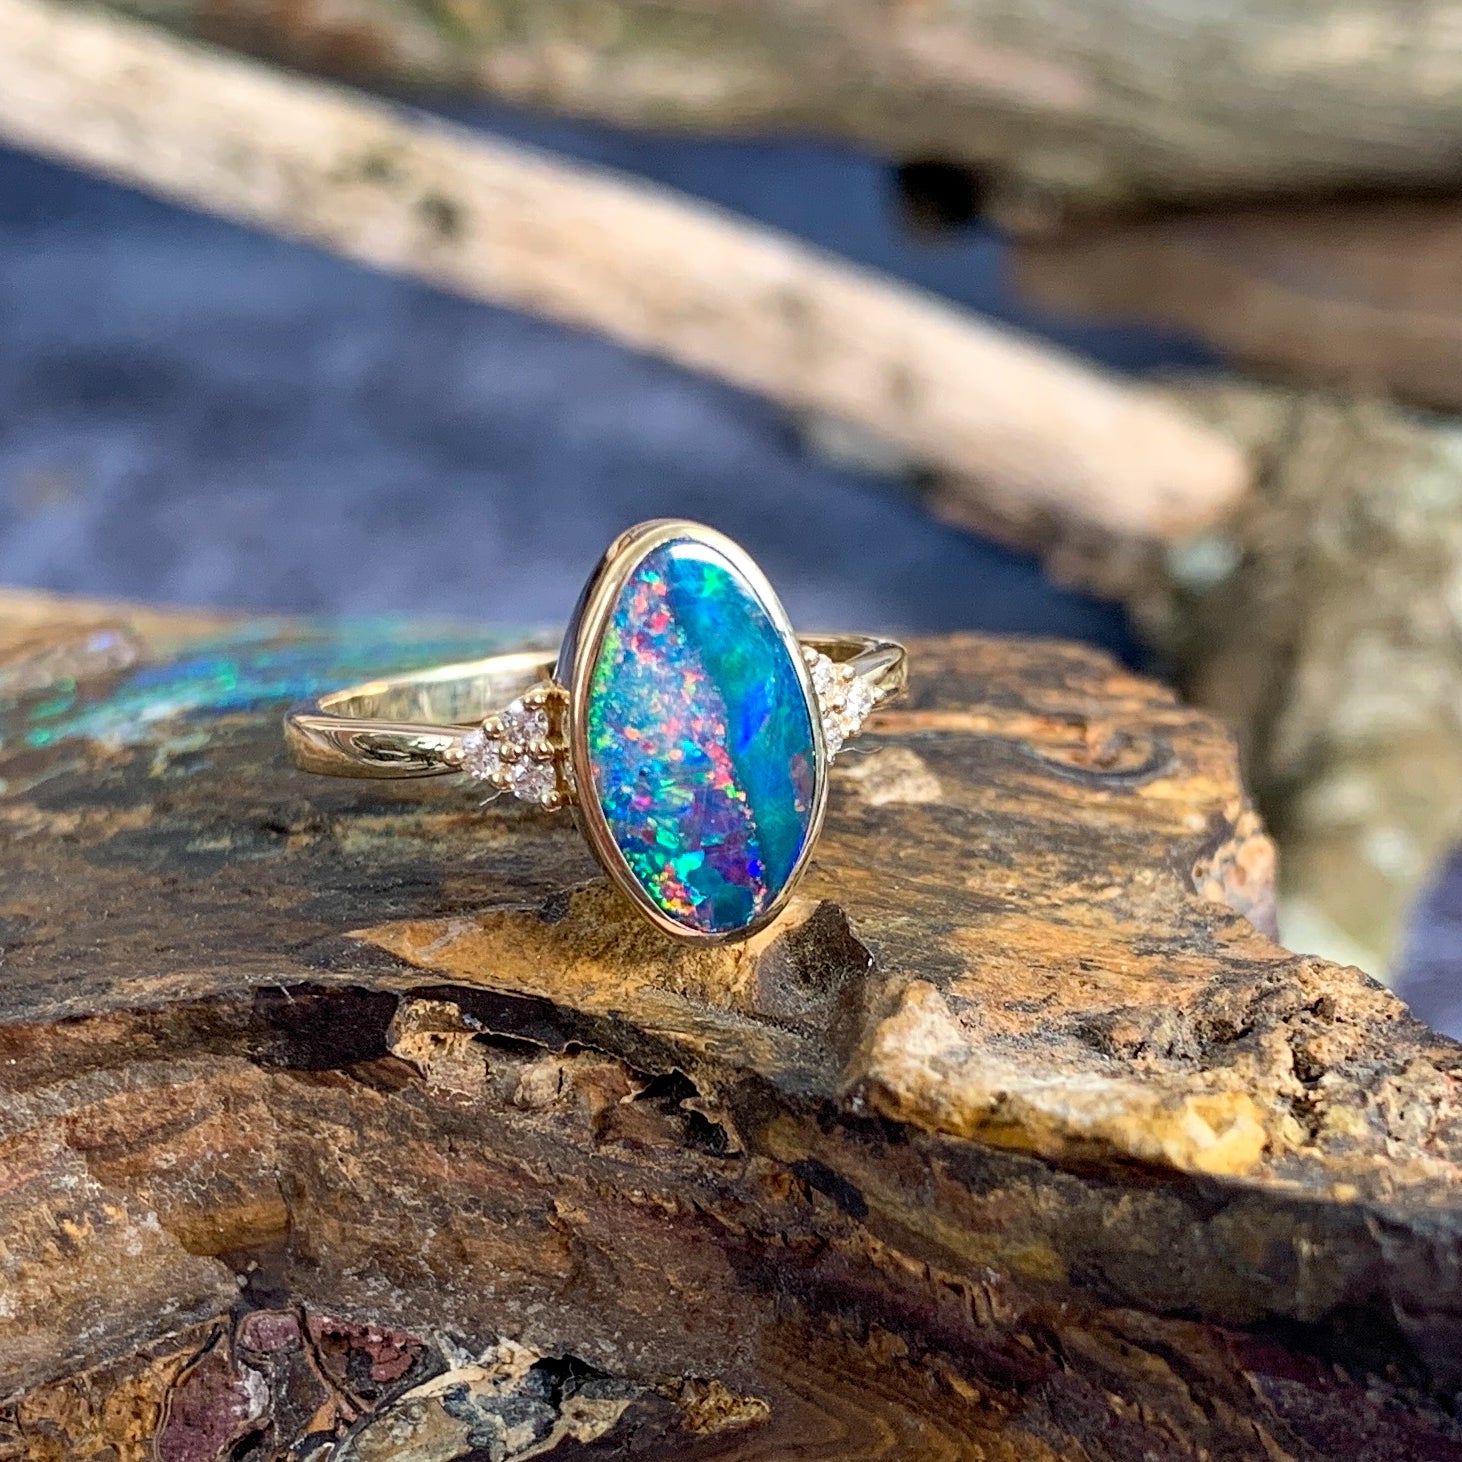 One 14kt Yellow Gold Oval freeform Red and Green Opal doublet with diamonds ring - Masterpiece Jewellery Opal & Gems Sydney Australia | Online Shop